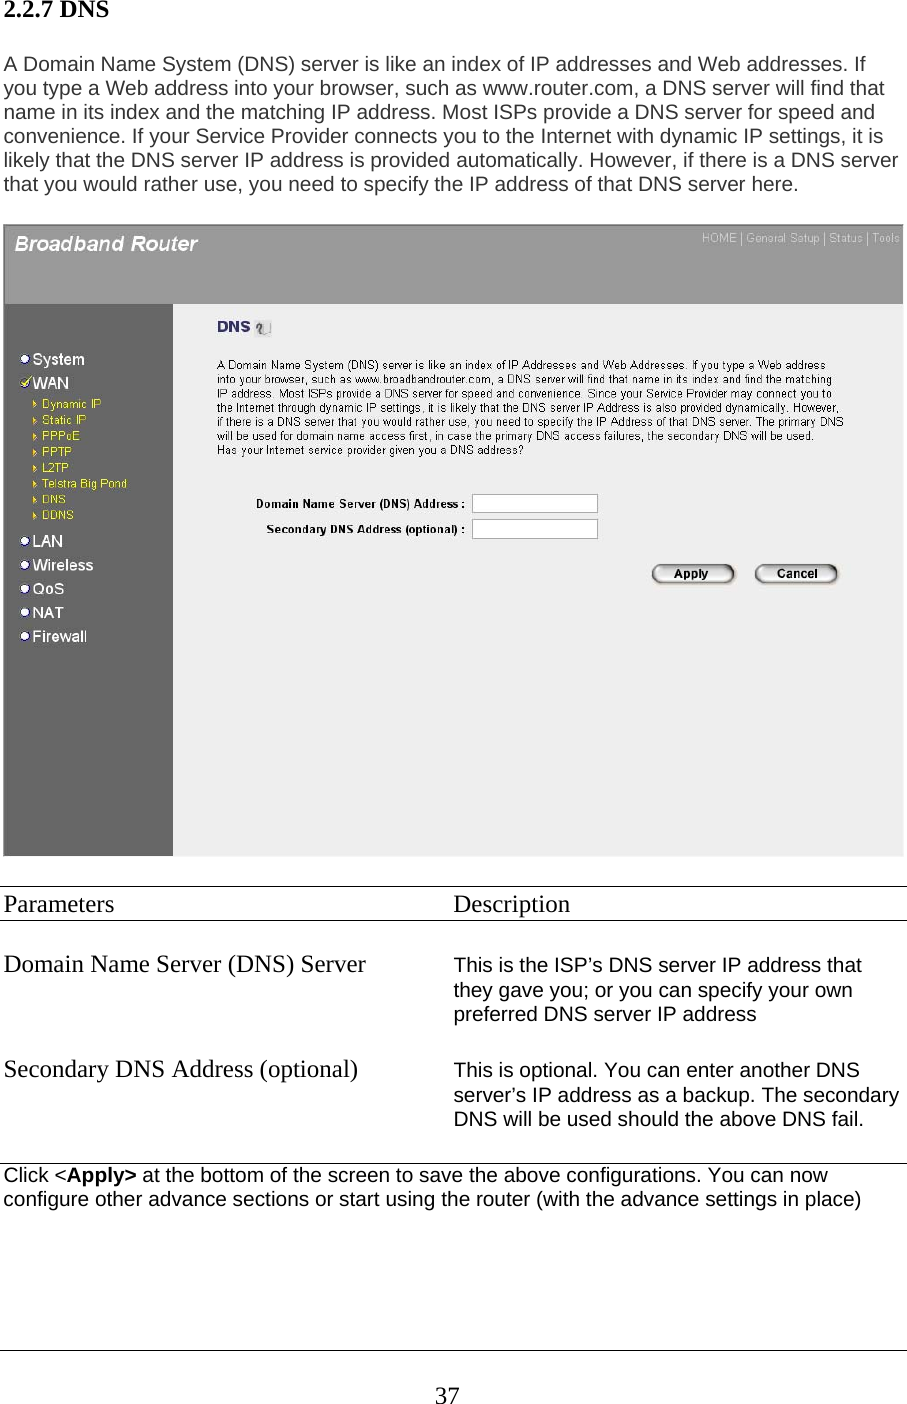 2.2.7 DNS A Domain Name System (DNS) server is like an index of IP addresses and Web addresses. If you type a Web address into your browser, such as www.router.com, a DNS server will find that name in its index and the matching IP address. Most ISPs provide a DNS server for speed and convenience. If your Service Provider connects you to the Internet with dynamic IP settings, it is likely that the DNS server IP address is provided automatically. However, if there is a DNS server that you would rather use, you need to specify the IP address of that DNS server here.  Parameters     Description  Domain Name Server (DNS) Server  This is the ISP’s DNS server IP address that they gave you; or you can specify your own preferred DNS server IP address  Secondary DNS Address (optional)  This is optional. You can enter another DNS server’s IP address as a backup. The secondary DNS will be used should the above DNS fail.  Click &lt;Apply&gt; at the bottom of the screen to save the above configurations. You can now configure other advance sections or start using the router (with the advance settings in place)     37